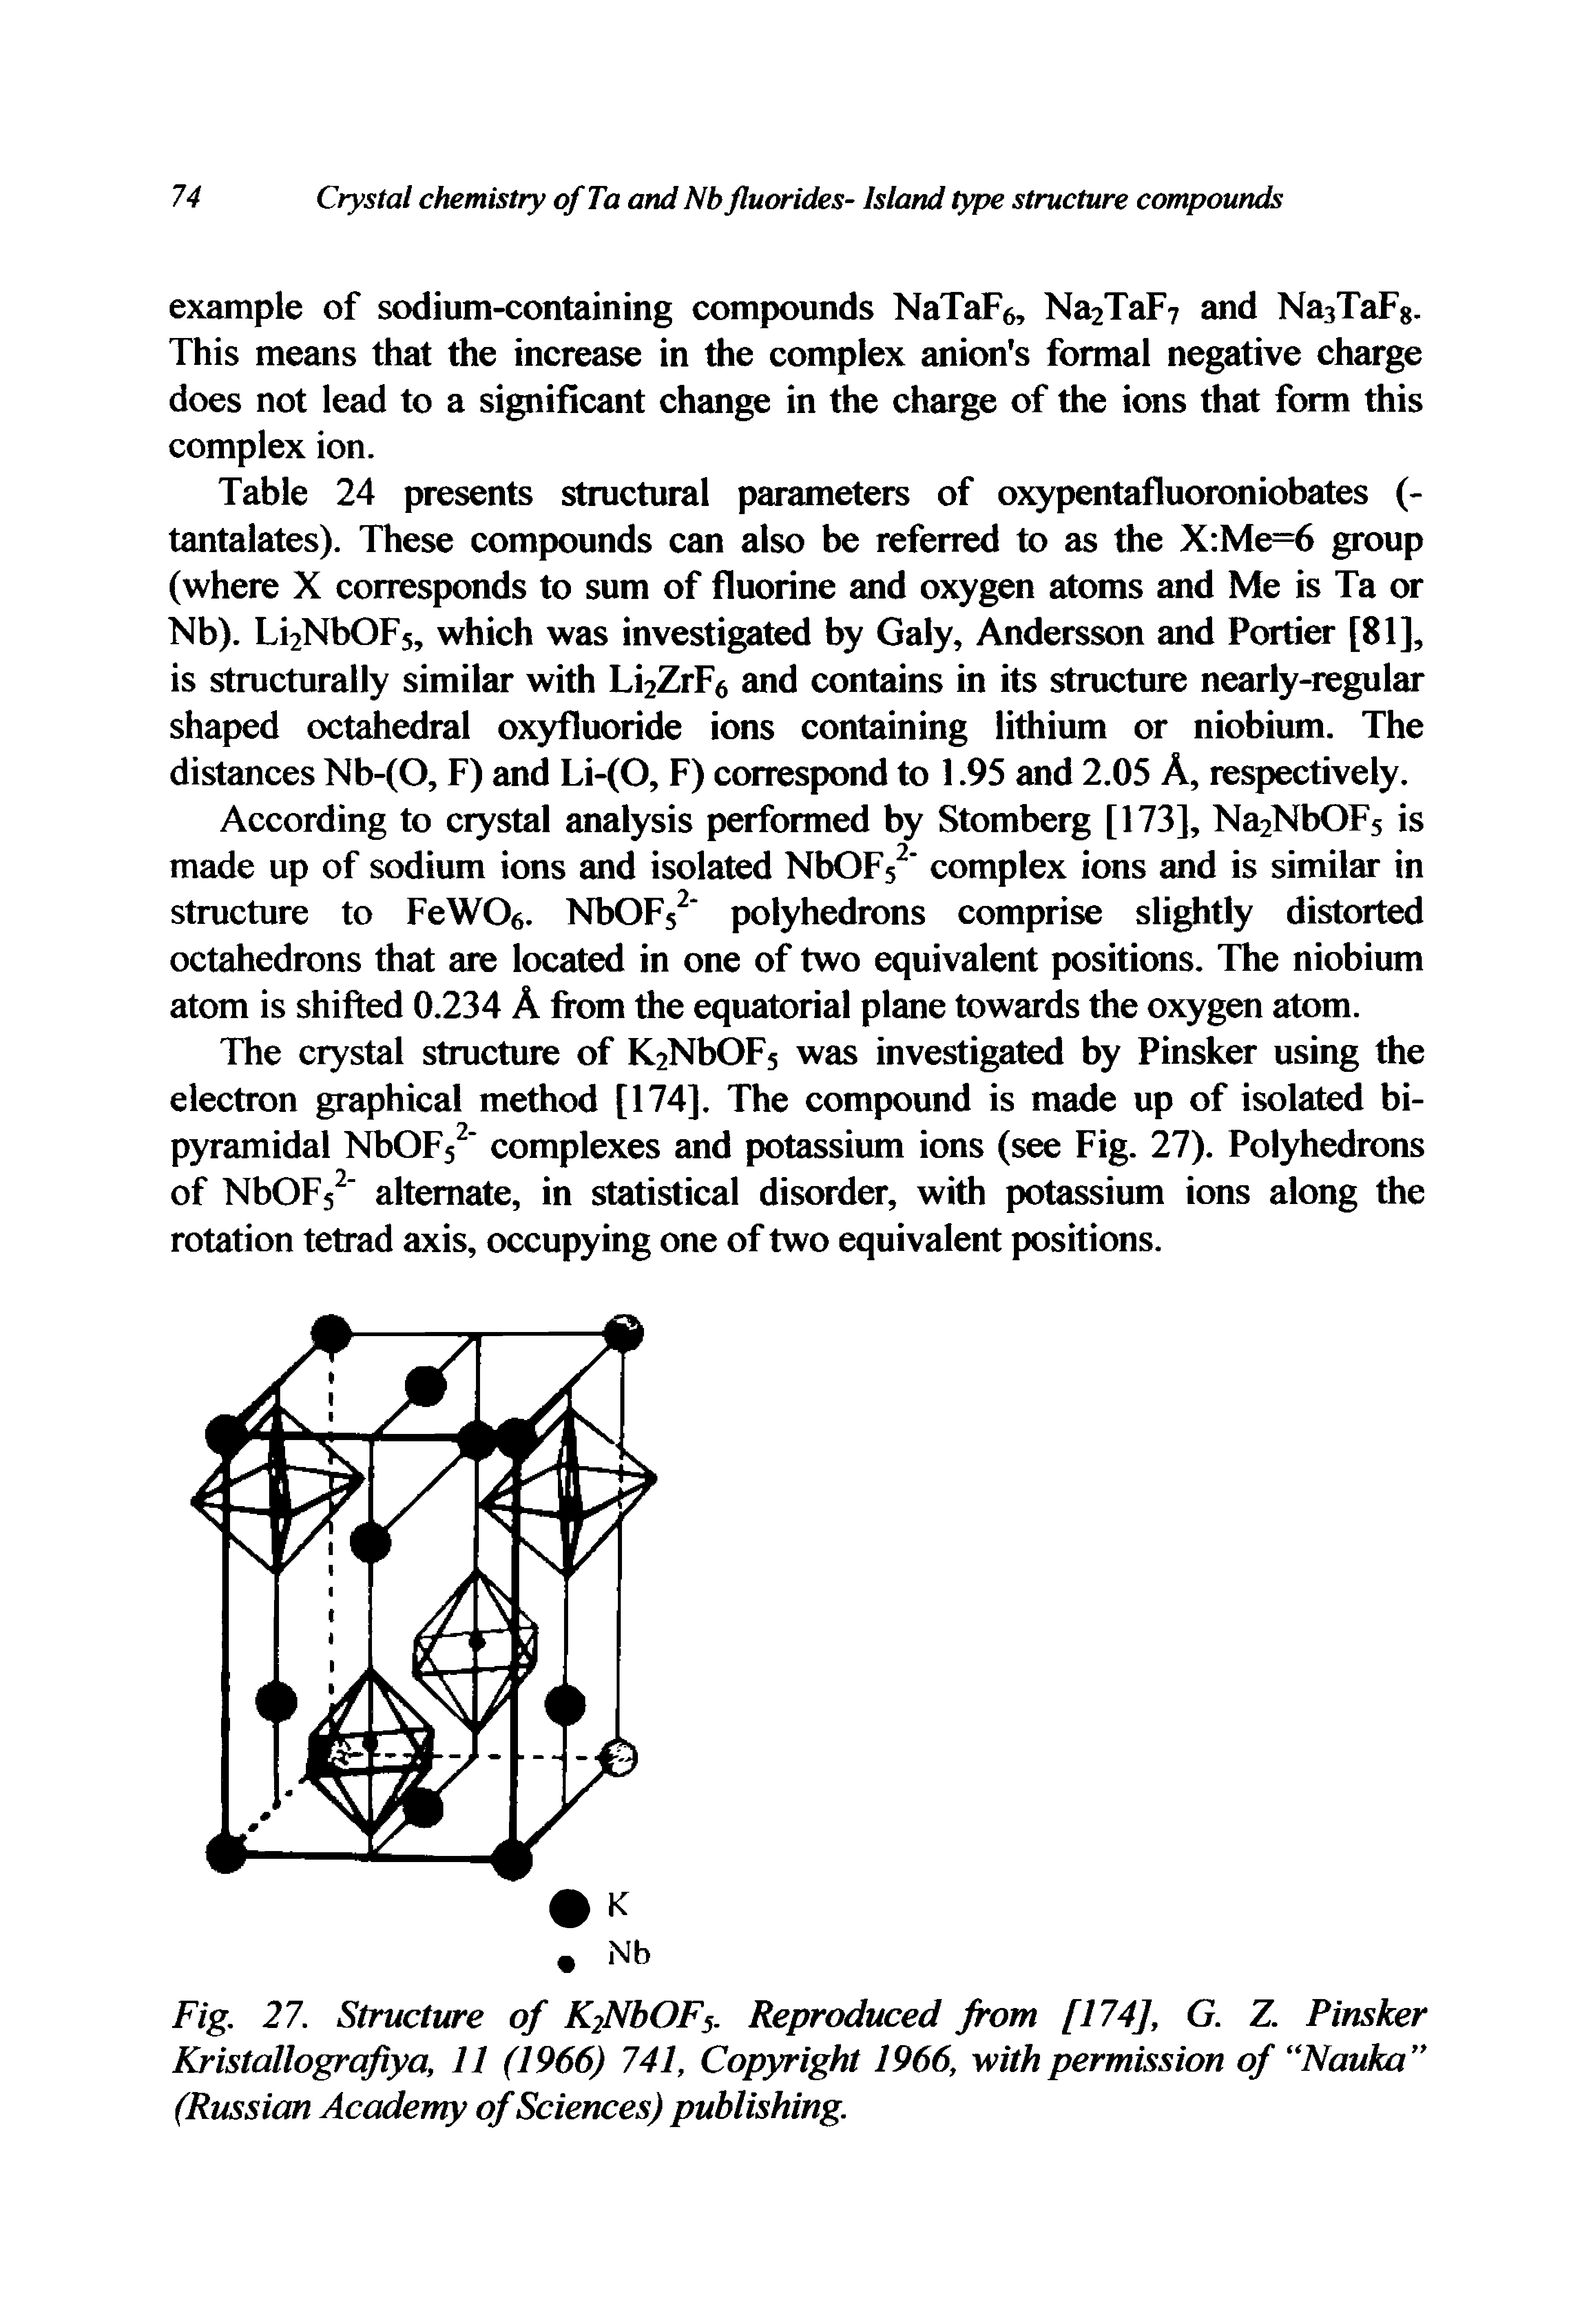 Fig. 27. Structure of K.2NbOF5. Reproduced from [174], G. Z. Pinsker Kristallografiya, 11 (1966) 741, Copyright 1966, with permission of Nauka (Russian Academy of Sciences) publishing.